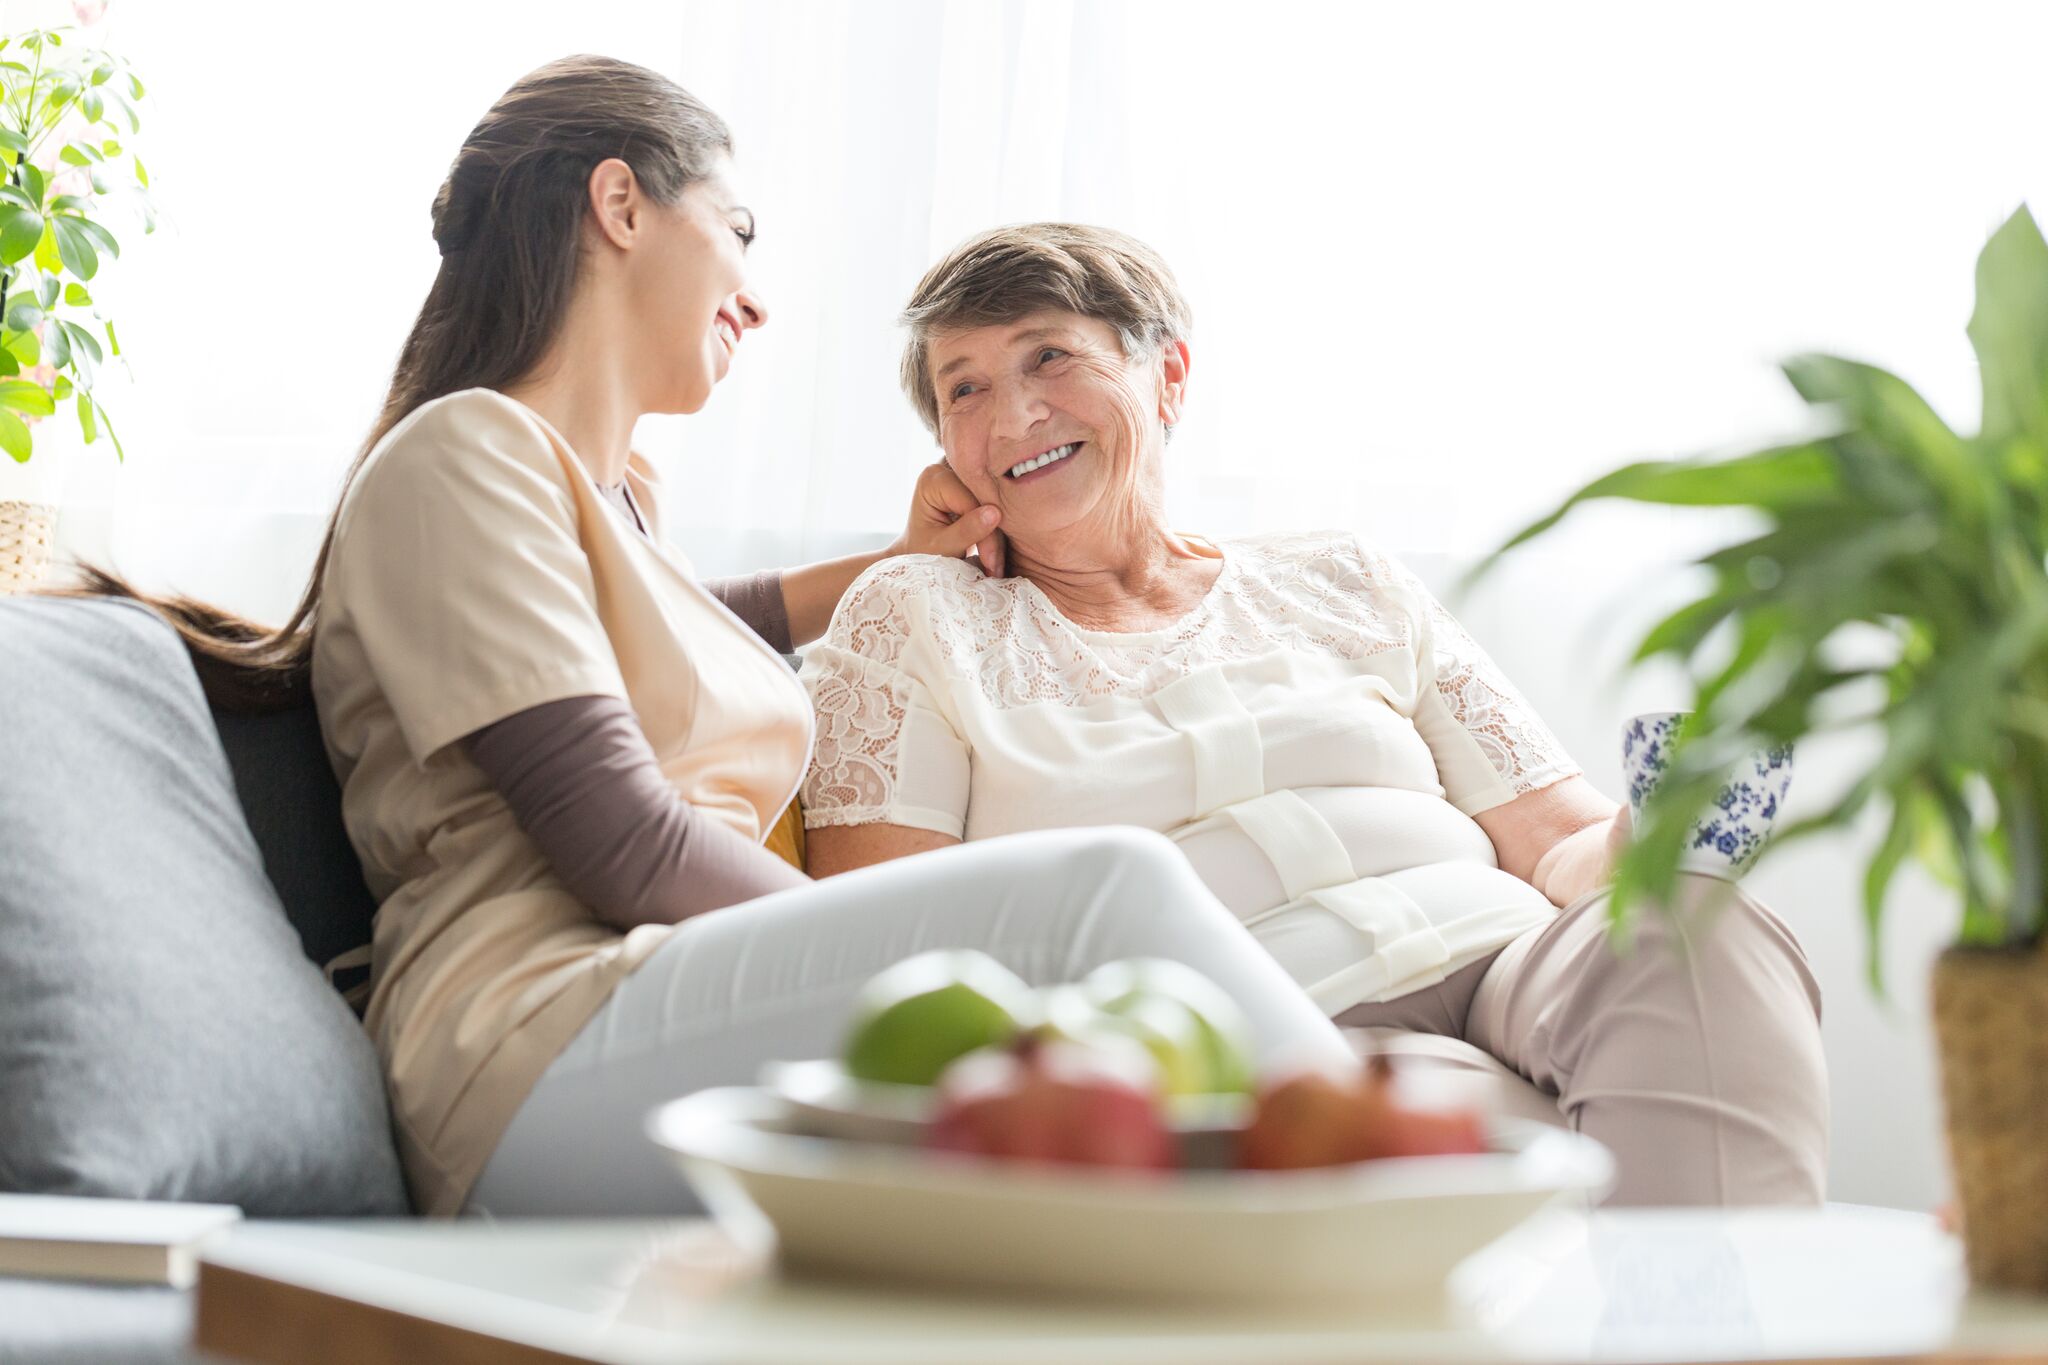 Caregiving the “New Norm”